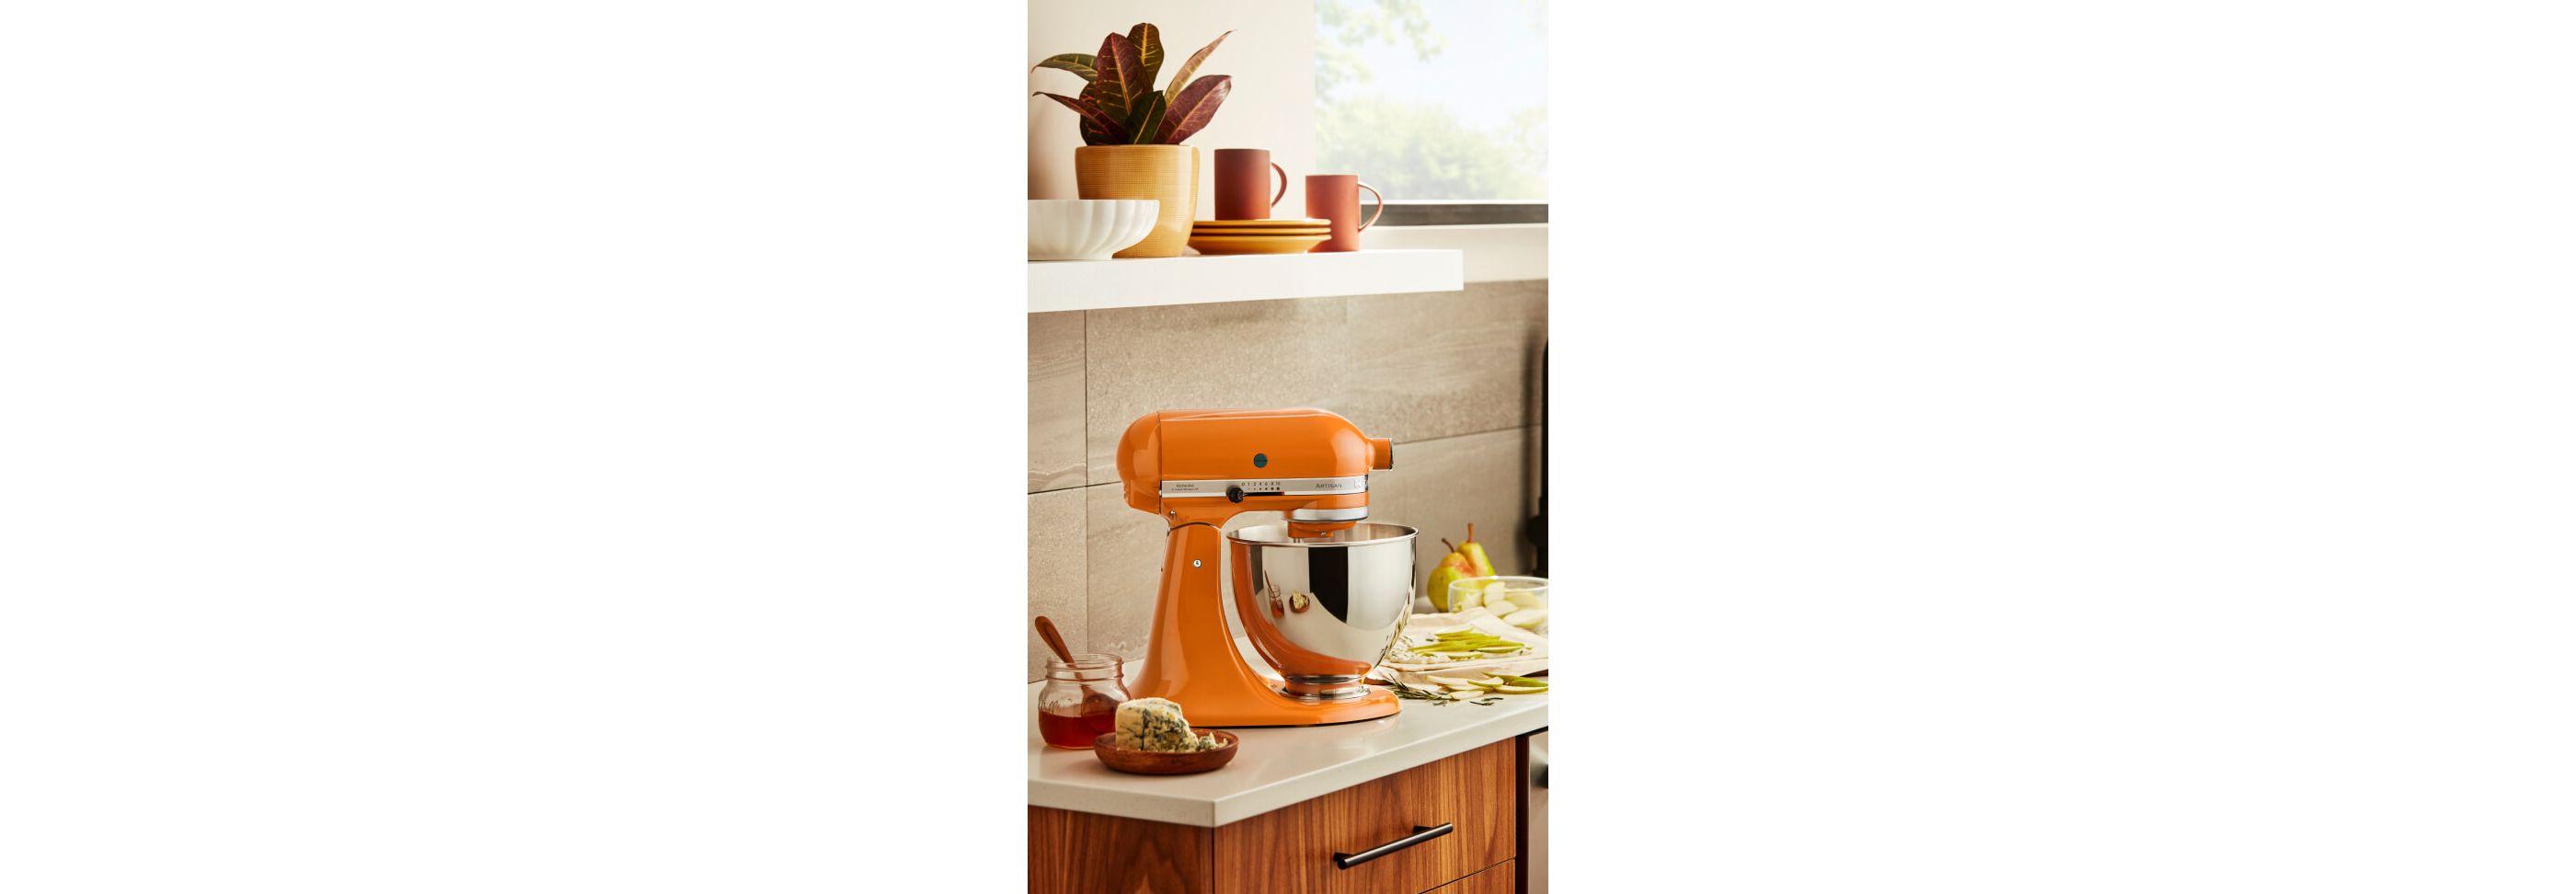 KitchenAid Artisan Color Selection Claim To Fame  Retail store design,  Kitchen aid, Home appliance store